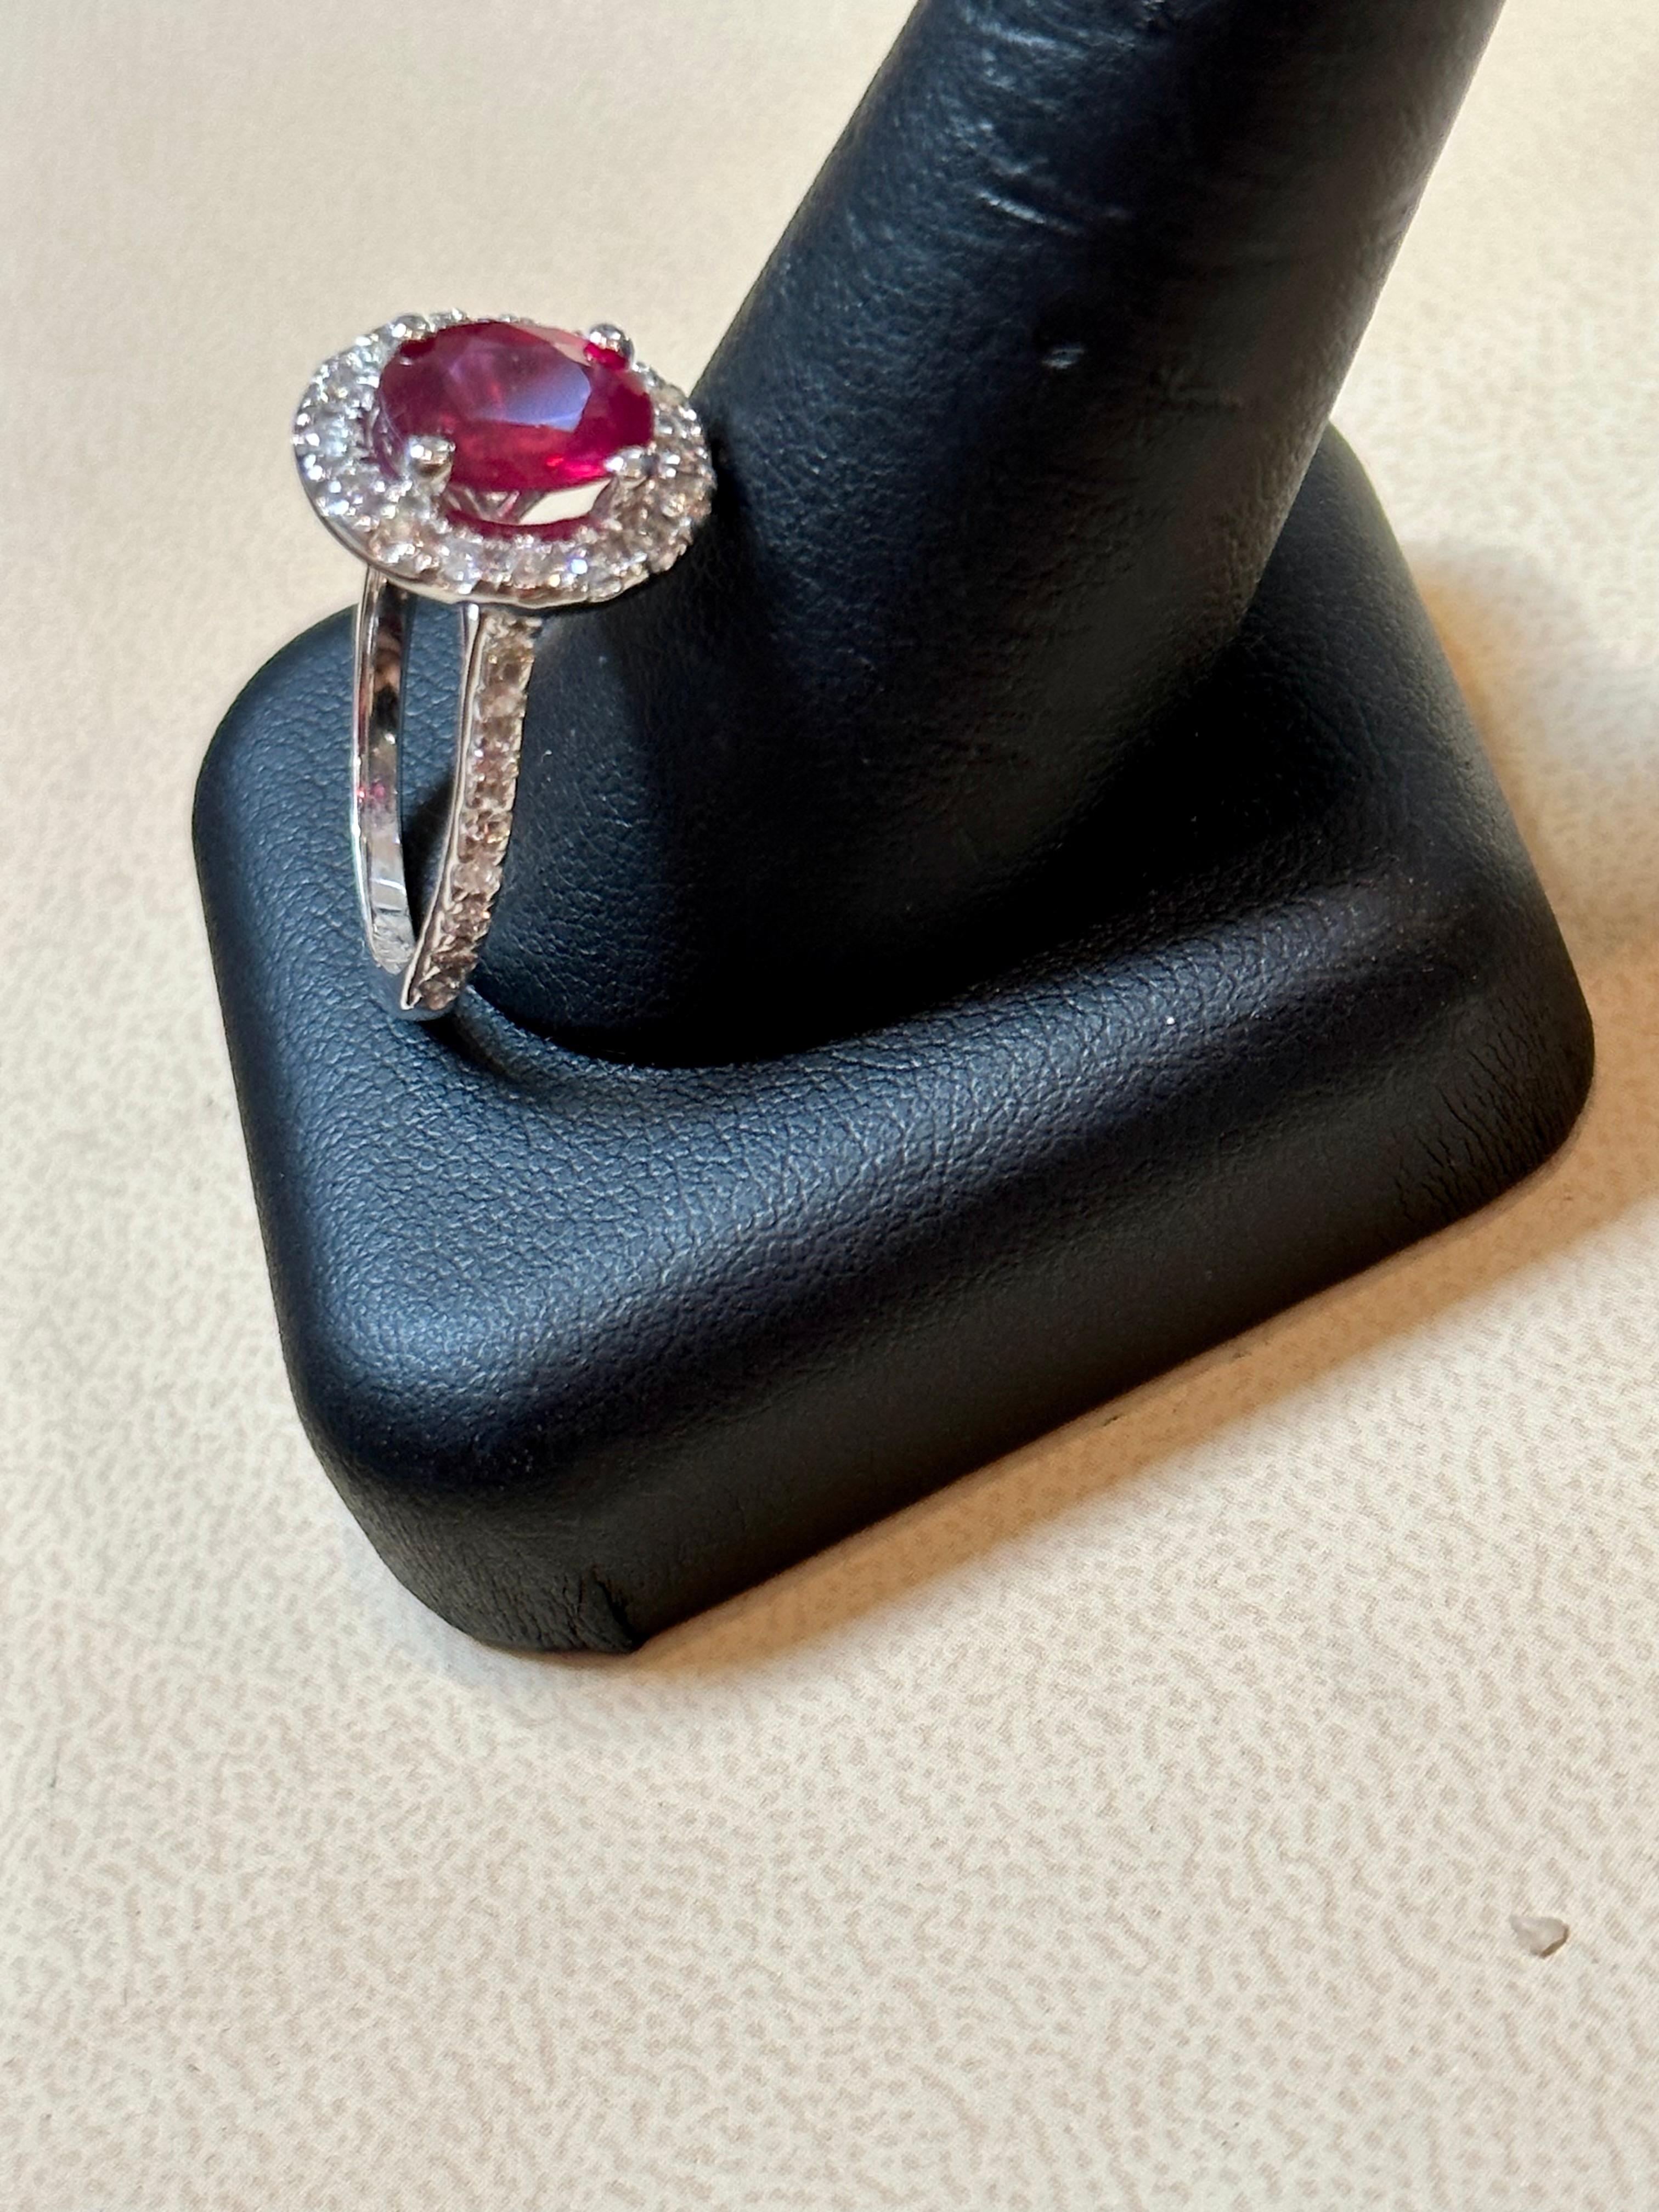 3 Carat Oval Treated Ruby & 1.25 ct Diamond Ring 14 Karat White Gold Size 6 For Sale 1